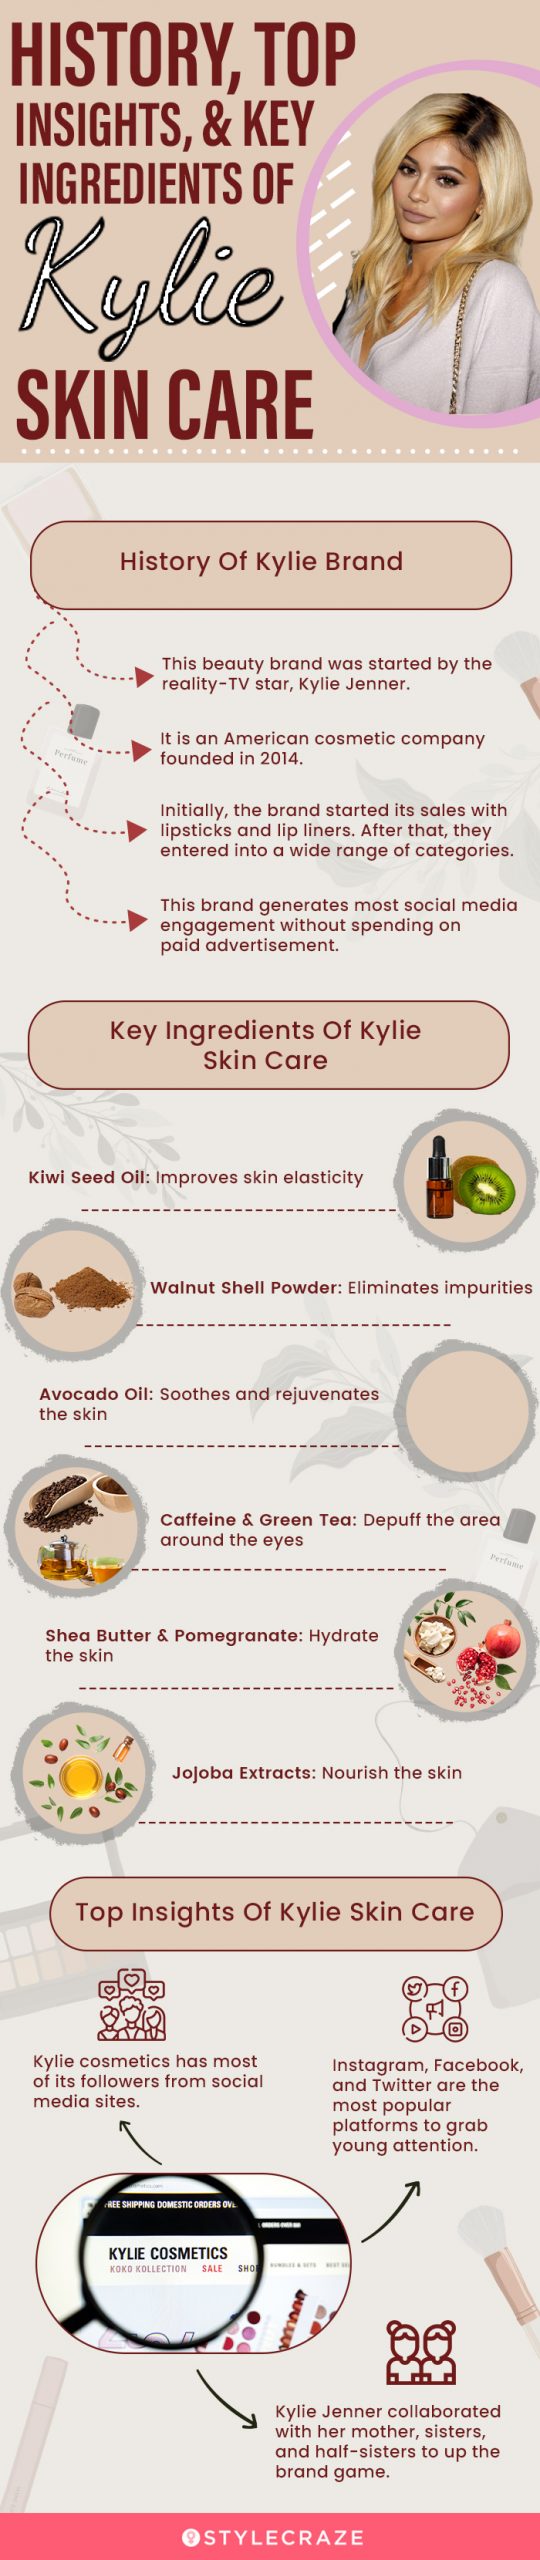 History, Top Insights Of Kylie Skin Care (infographic)